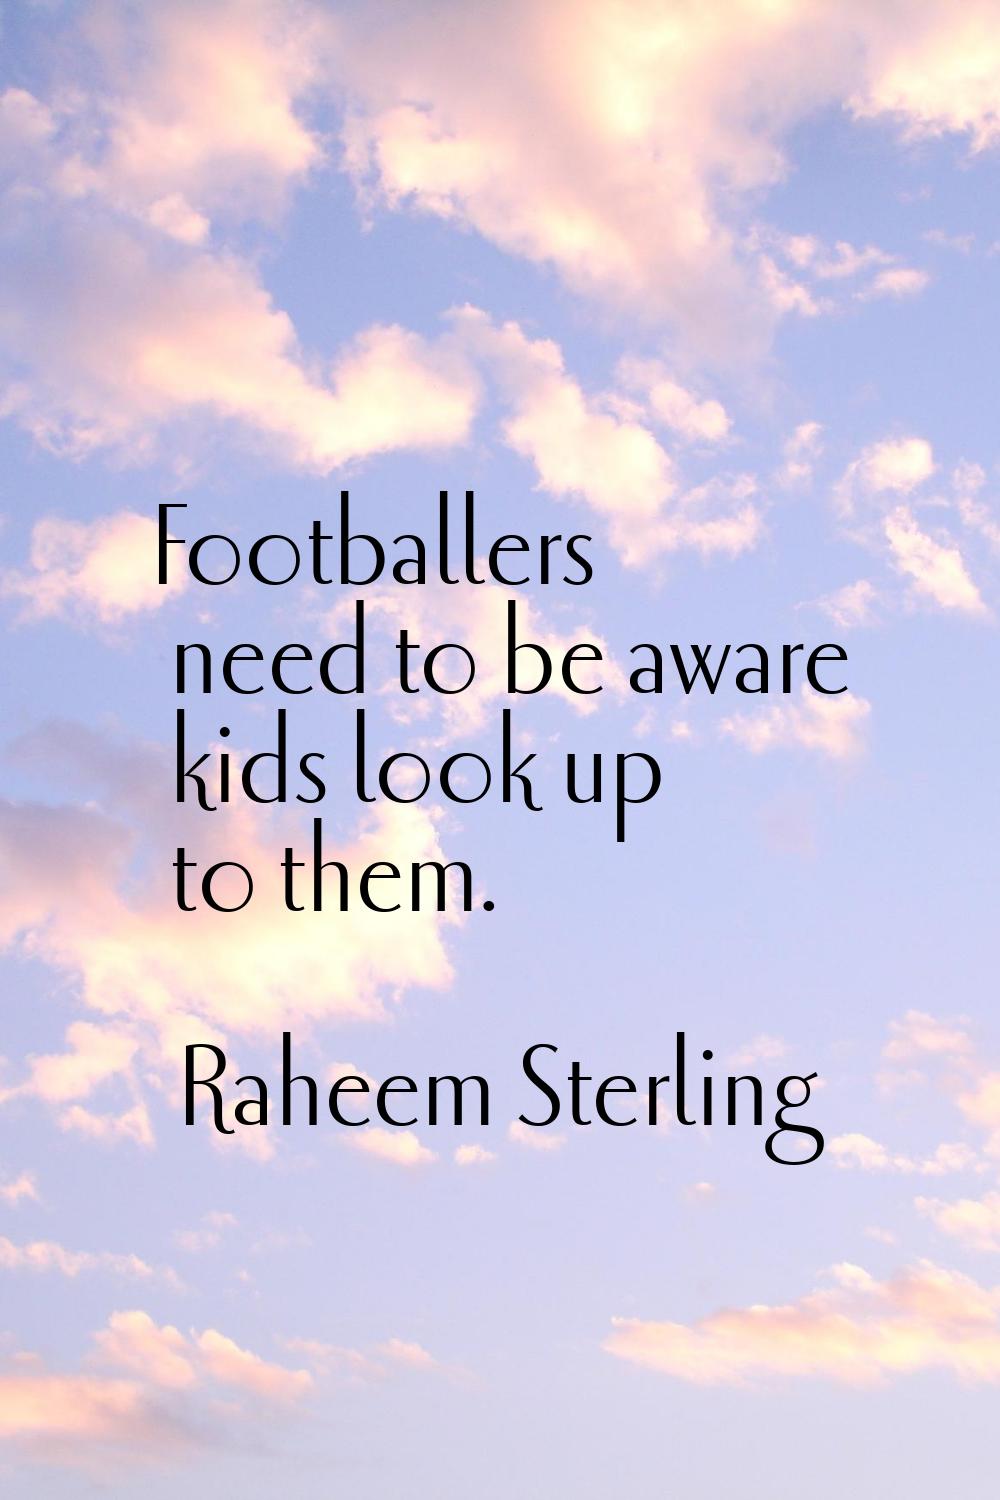 Footballers need to be aware kids look up to them.